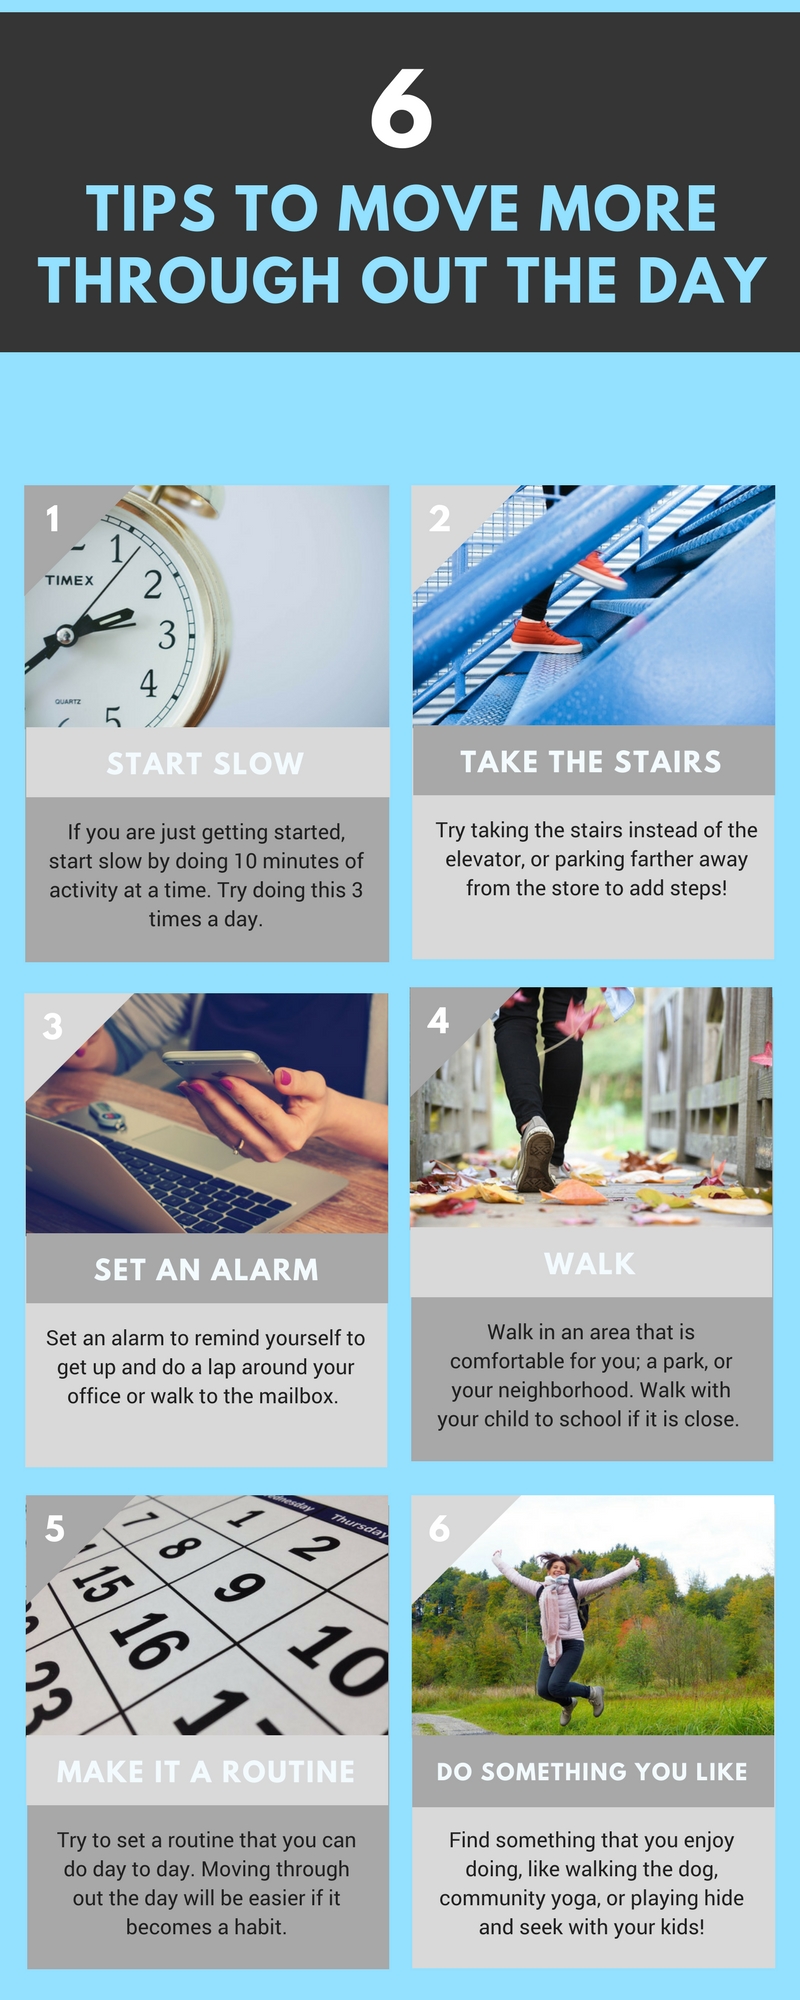 Tips to move more through out the day